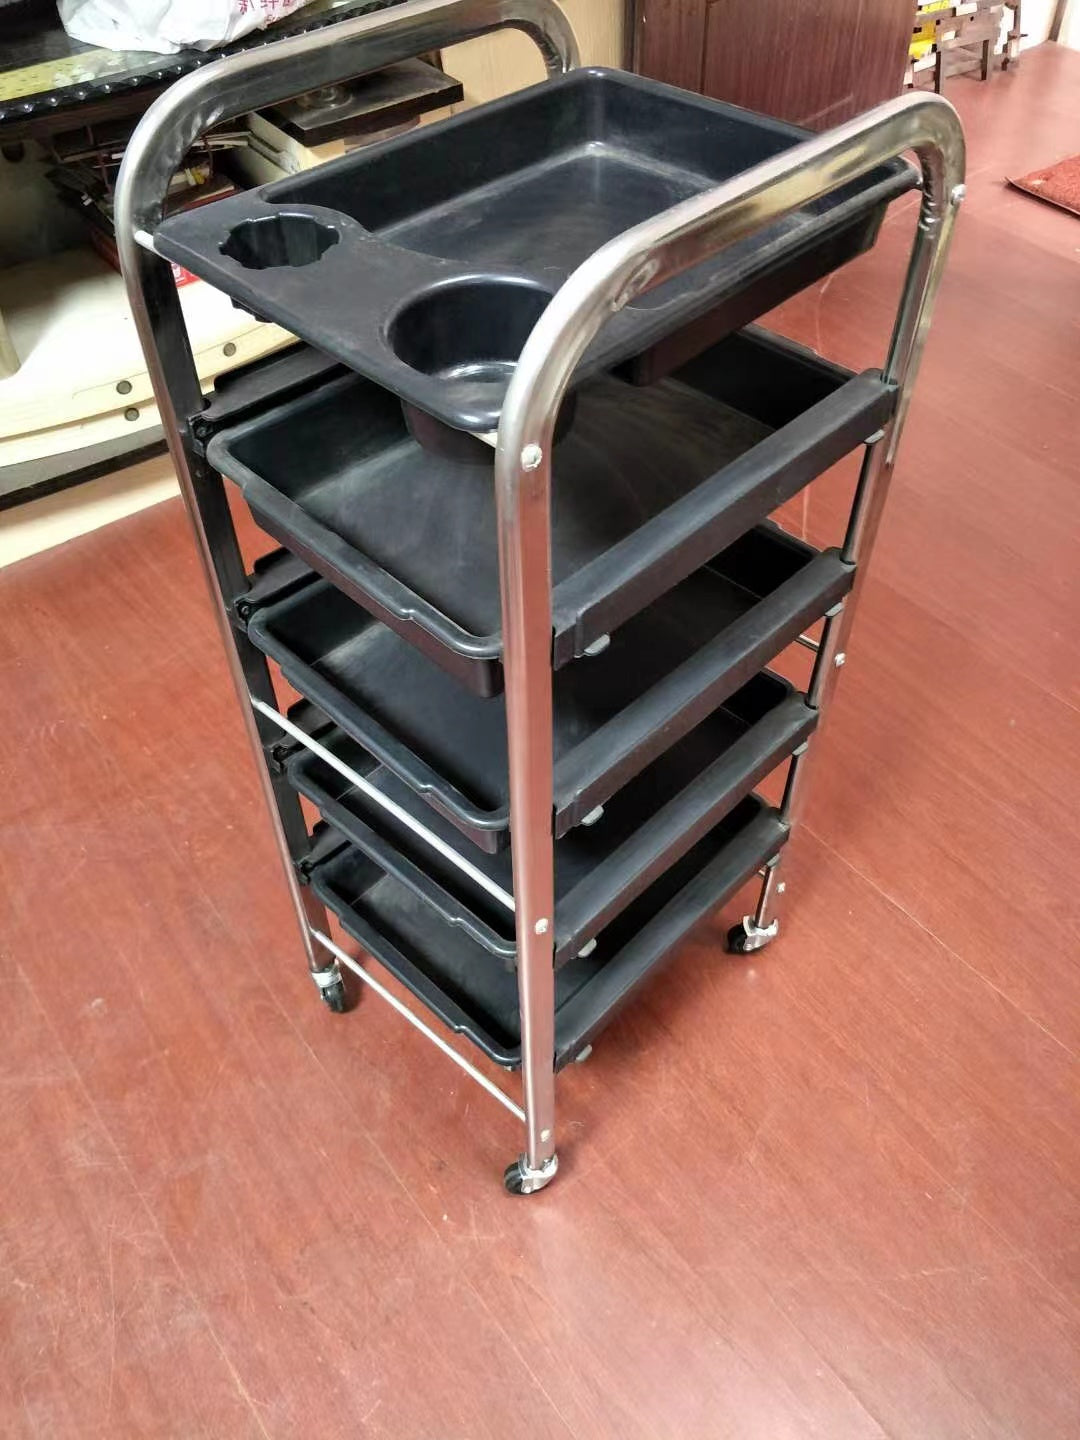 Rollers Carts – Chrome framed with plastic shelves